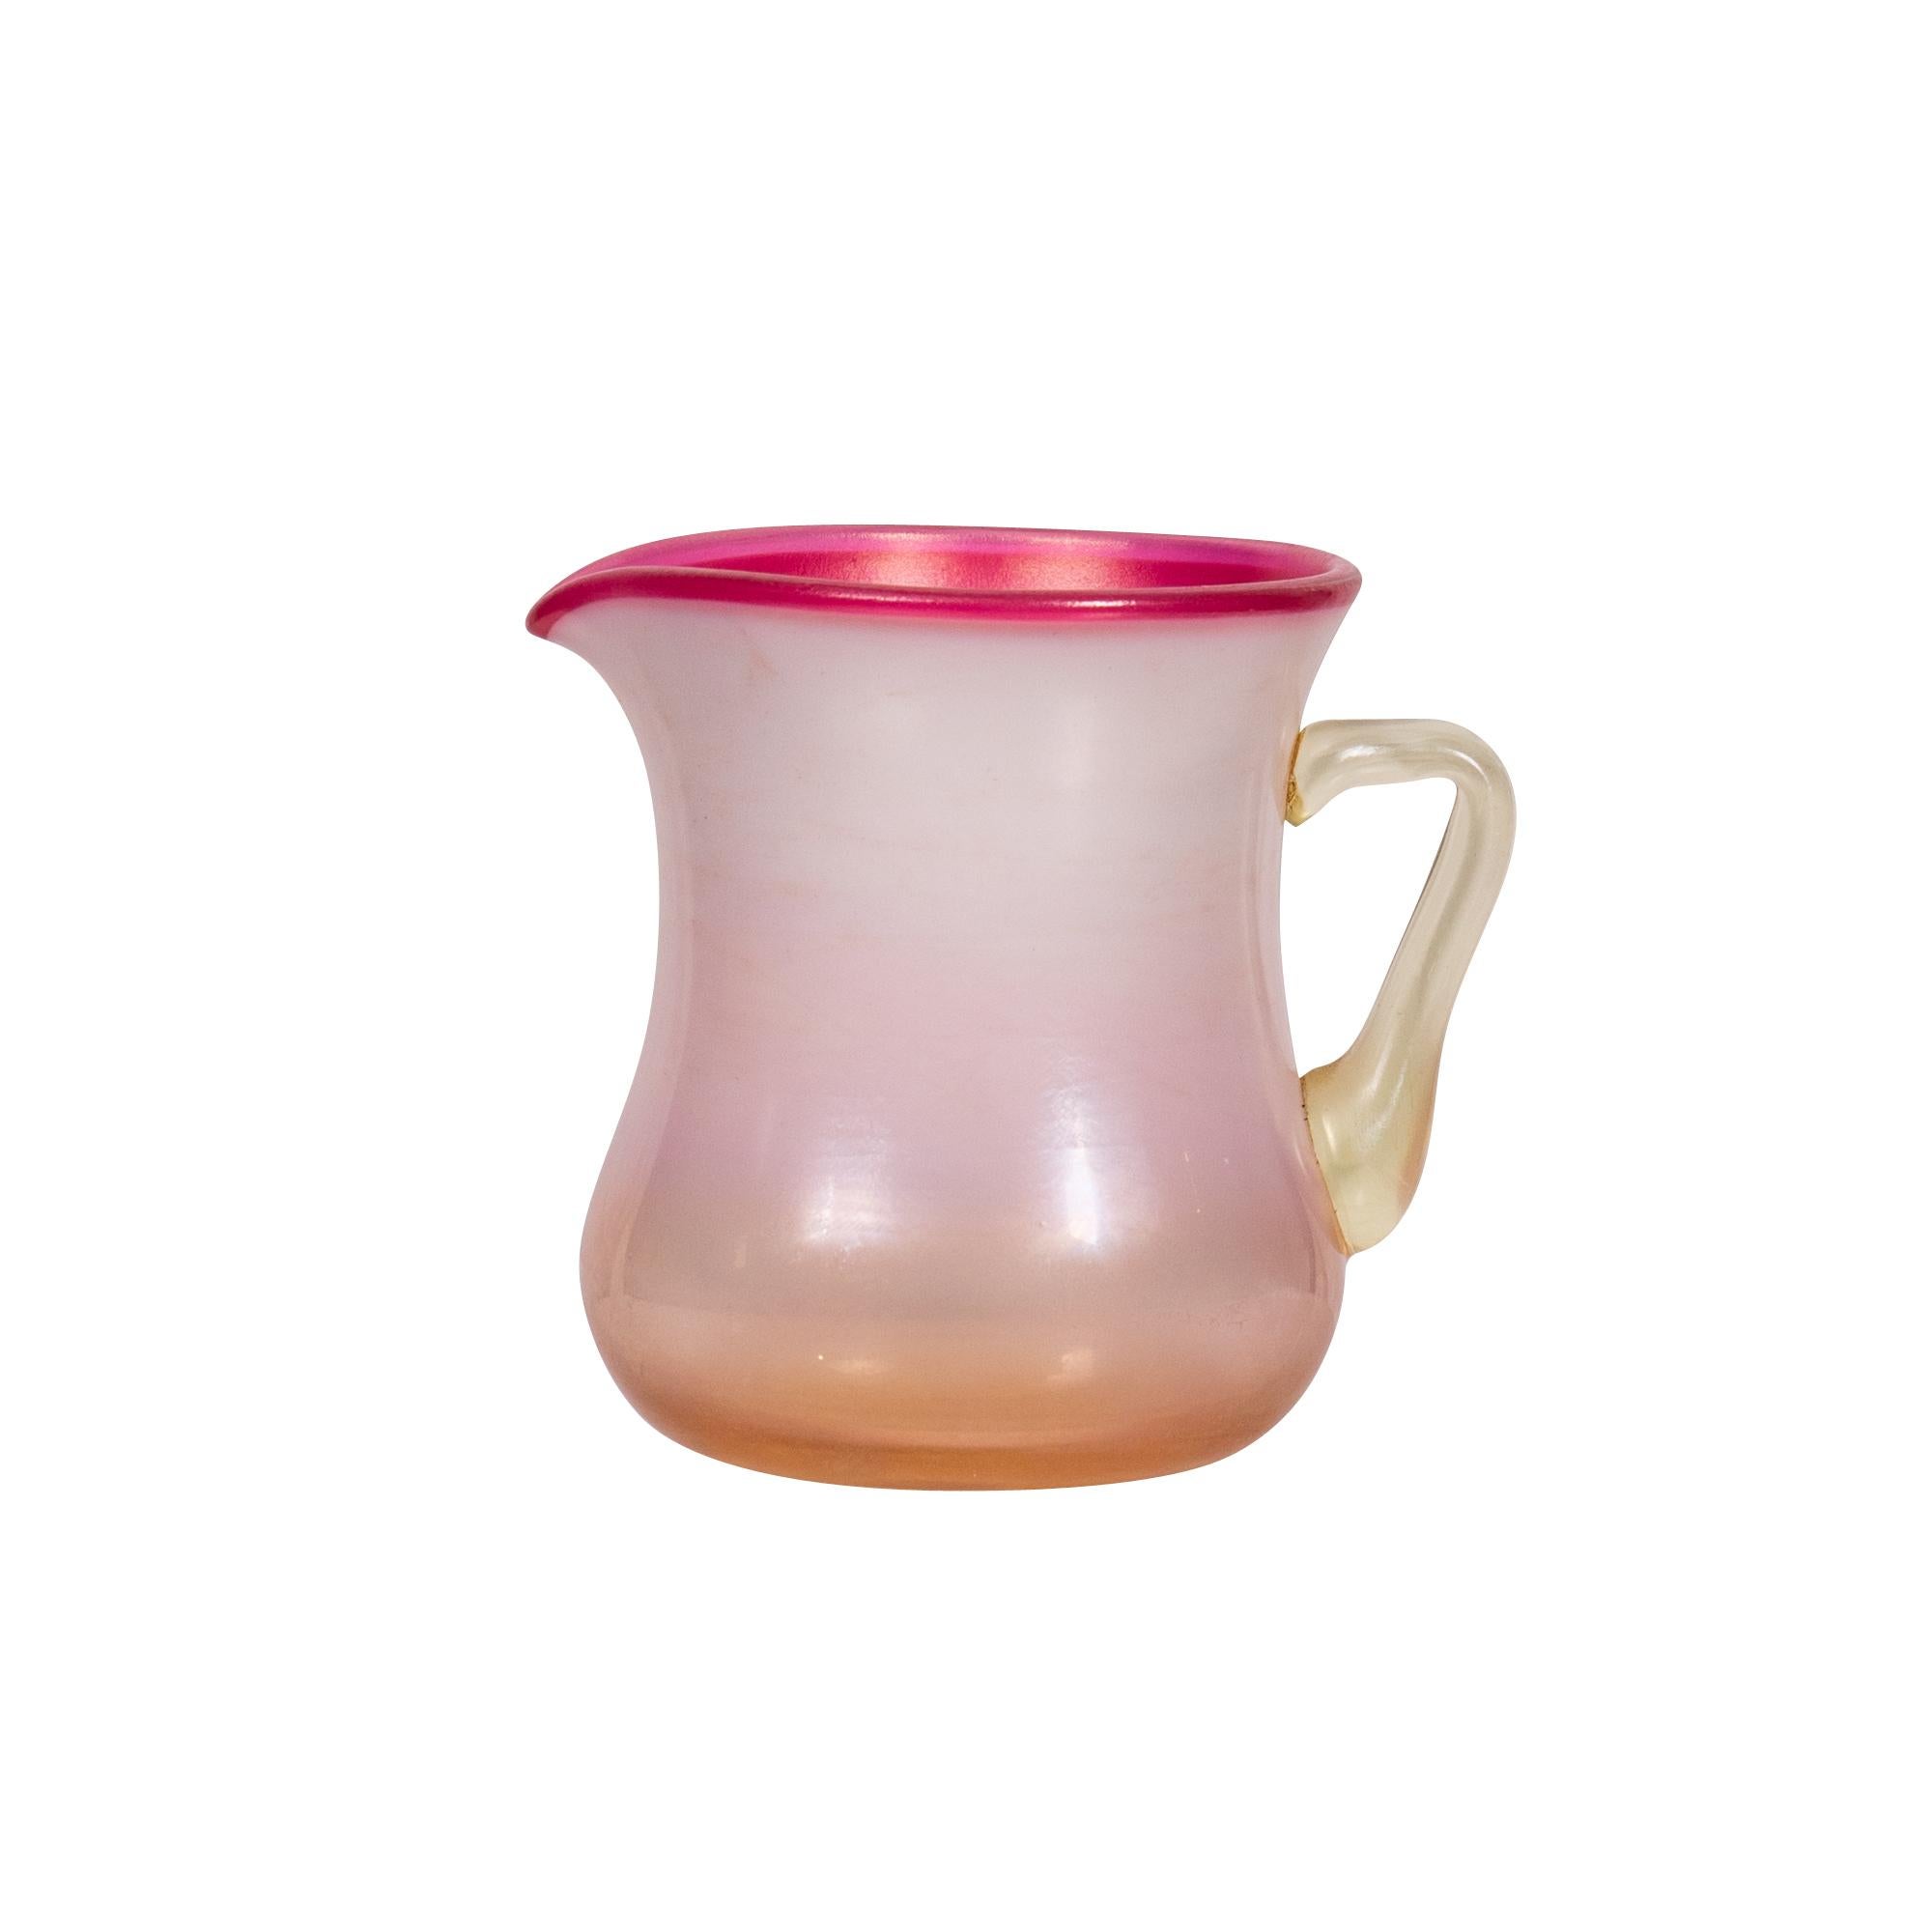 Early 20th Century Tiffany Studios Iridescent Pink Favrile Glass Small Pitcher